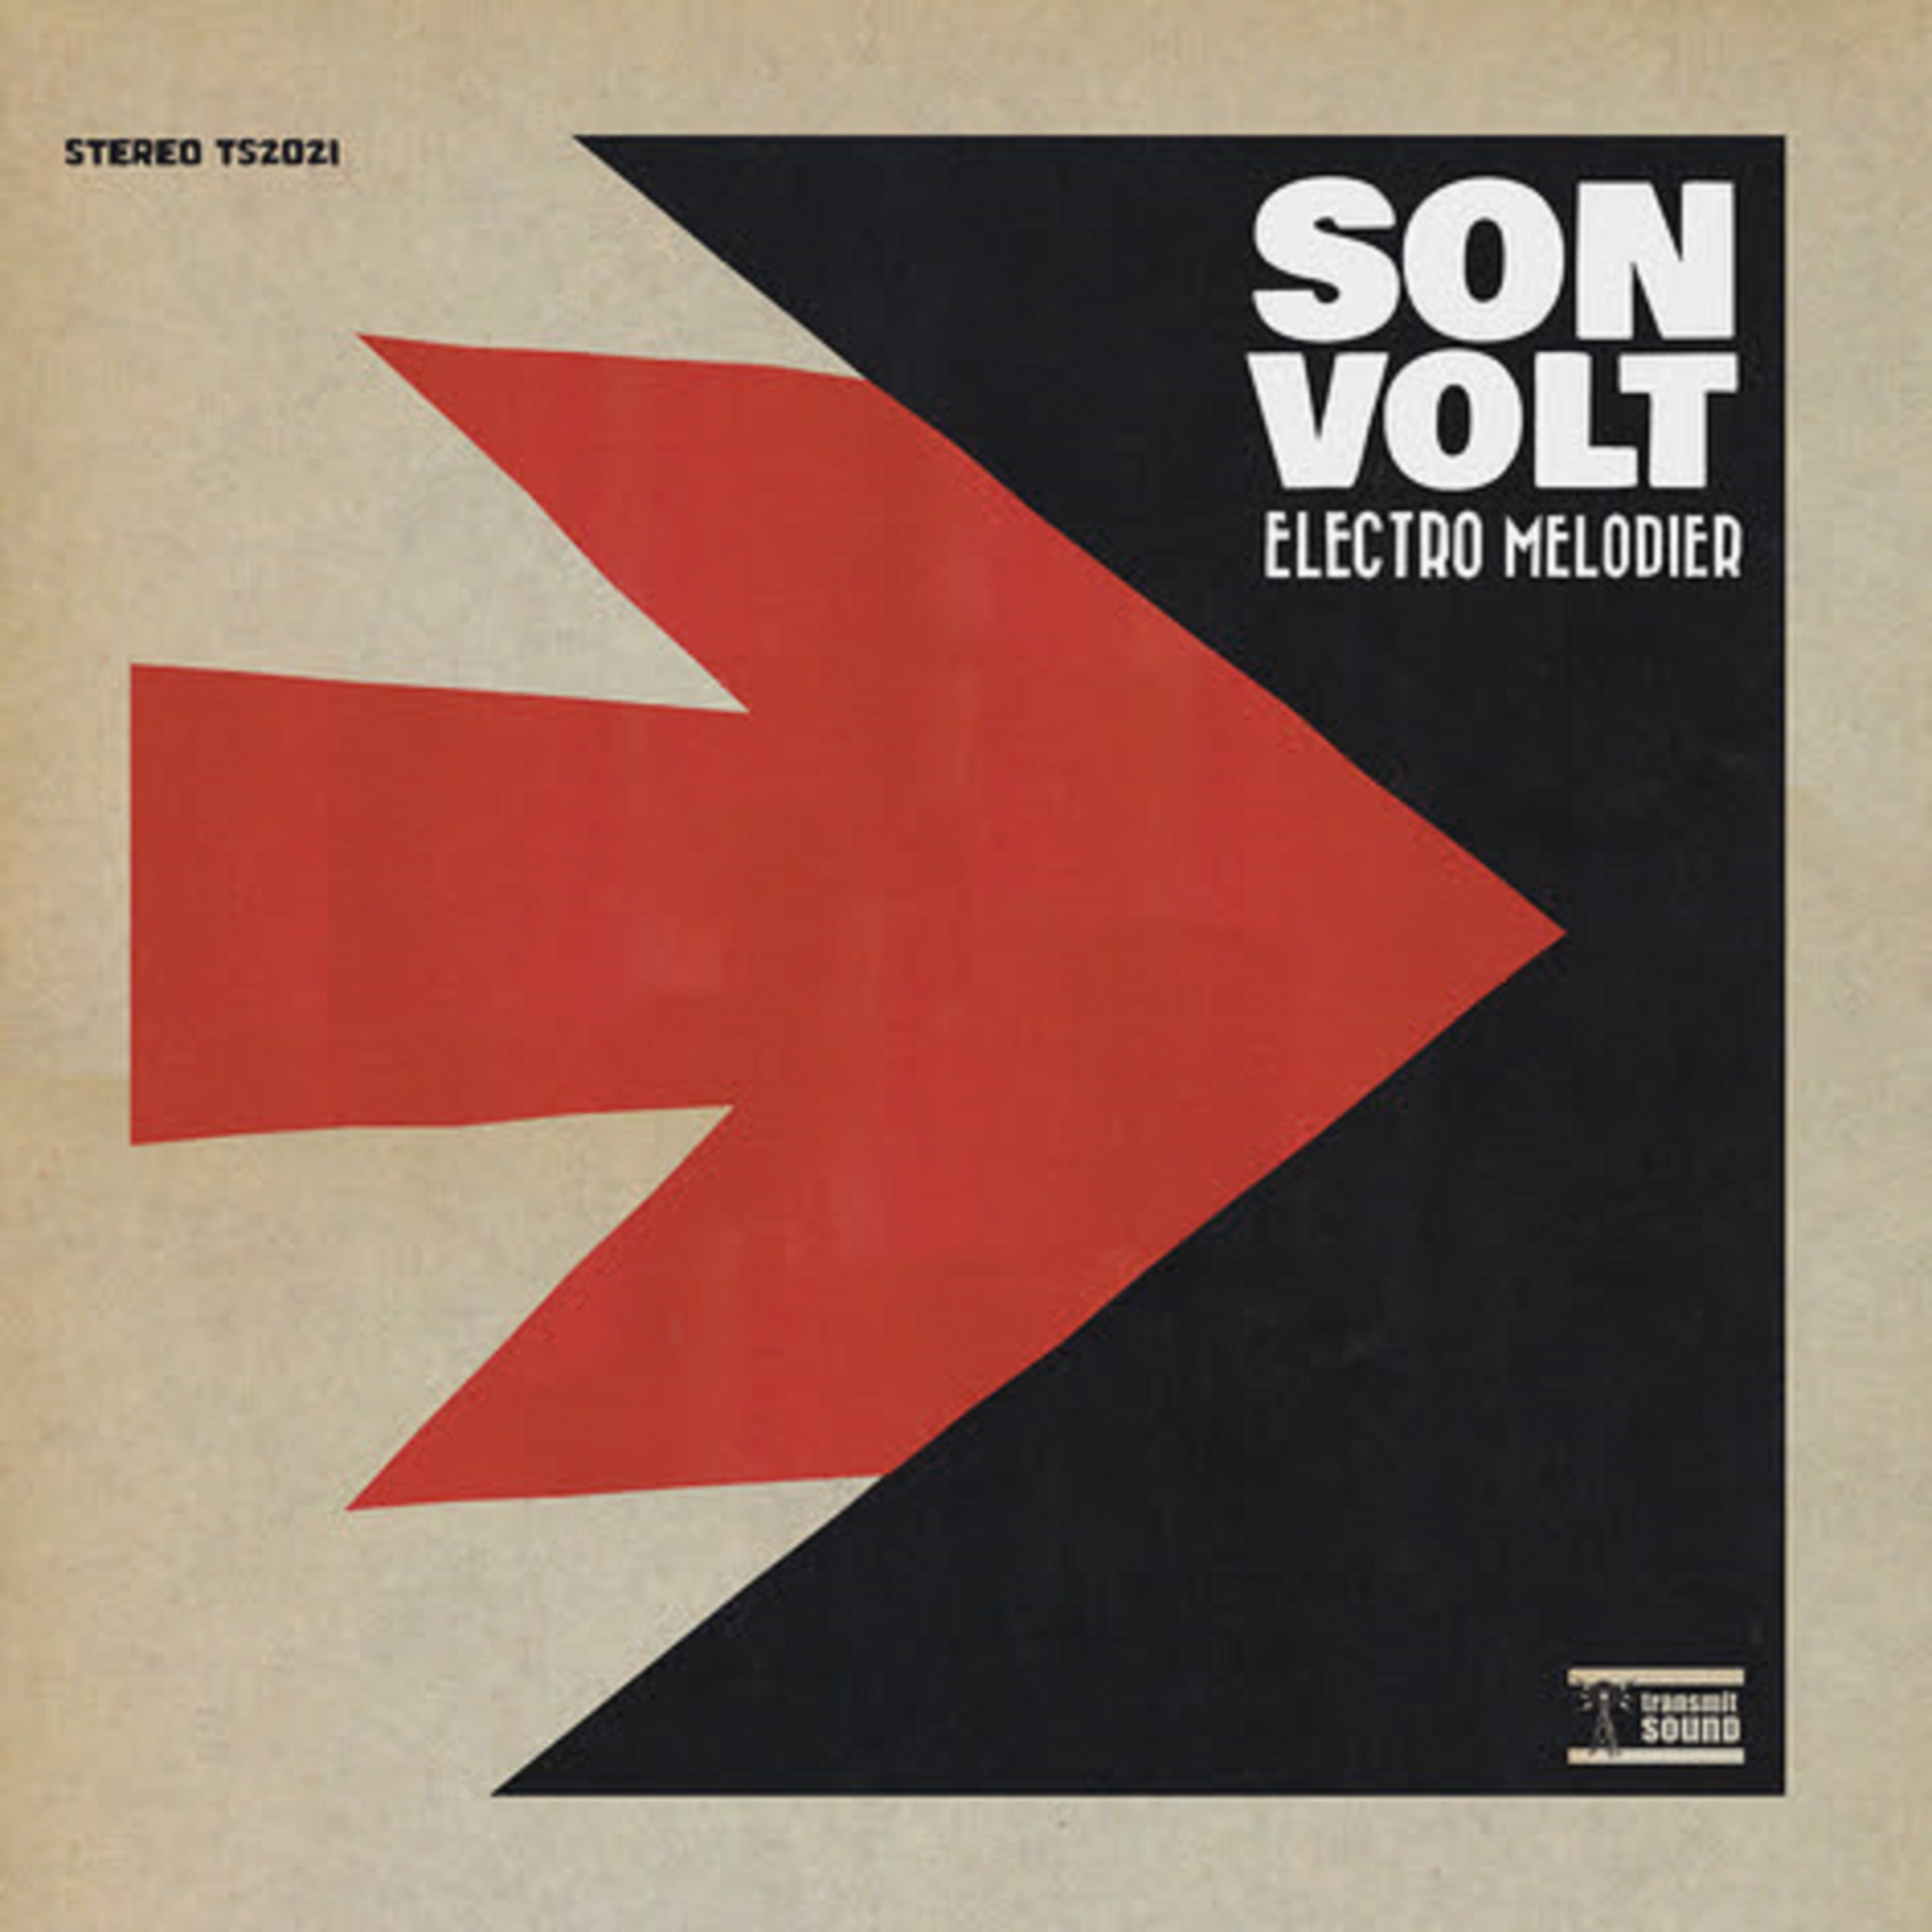 Son Volt Continue To Inspire And Challenge On ELECTRO MELODIER Out July 30th